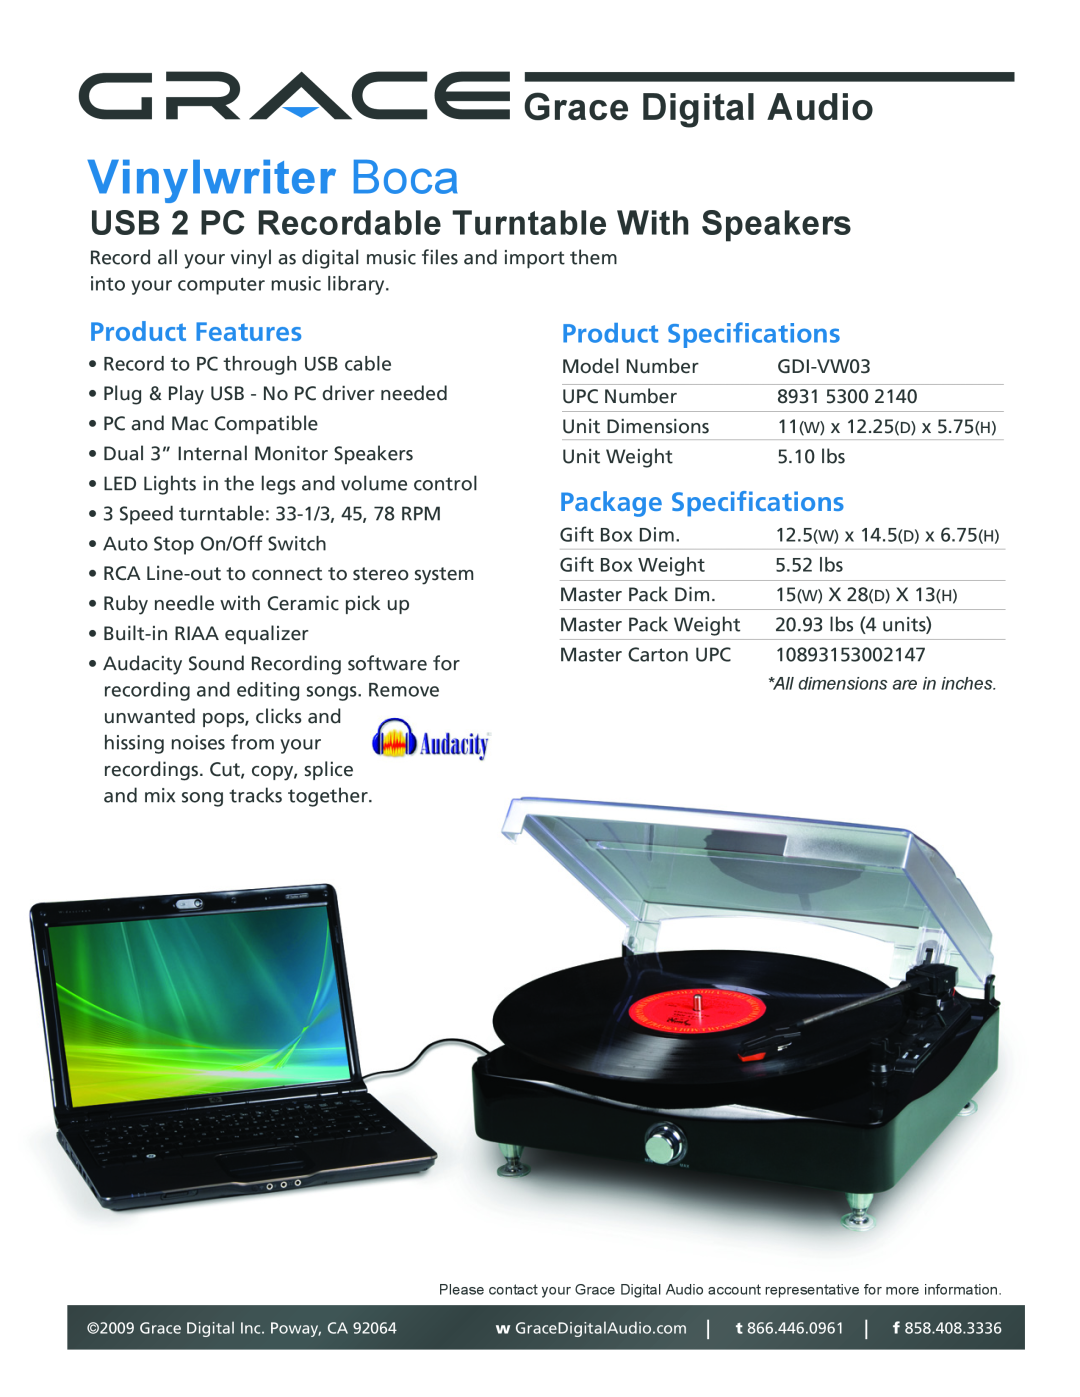 Grace GDI-VW03 specifications Vinylwriter Boca, Grace Digital Audio, USB 2 PC Recordable Turntable With Speakers 